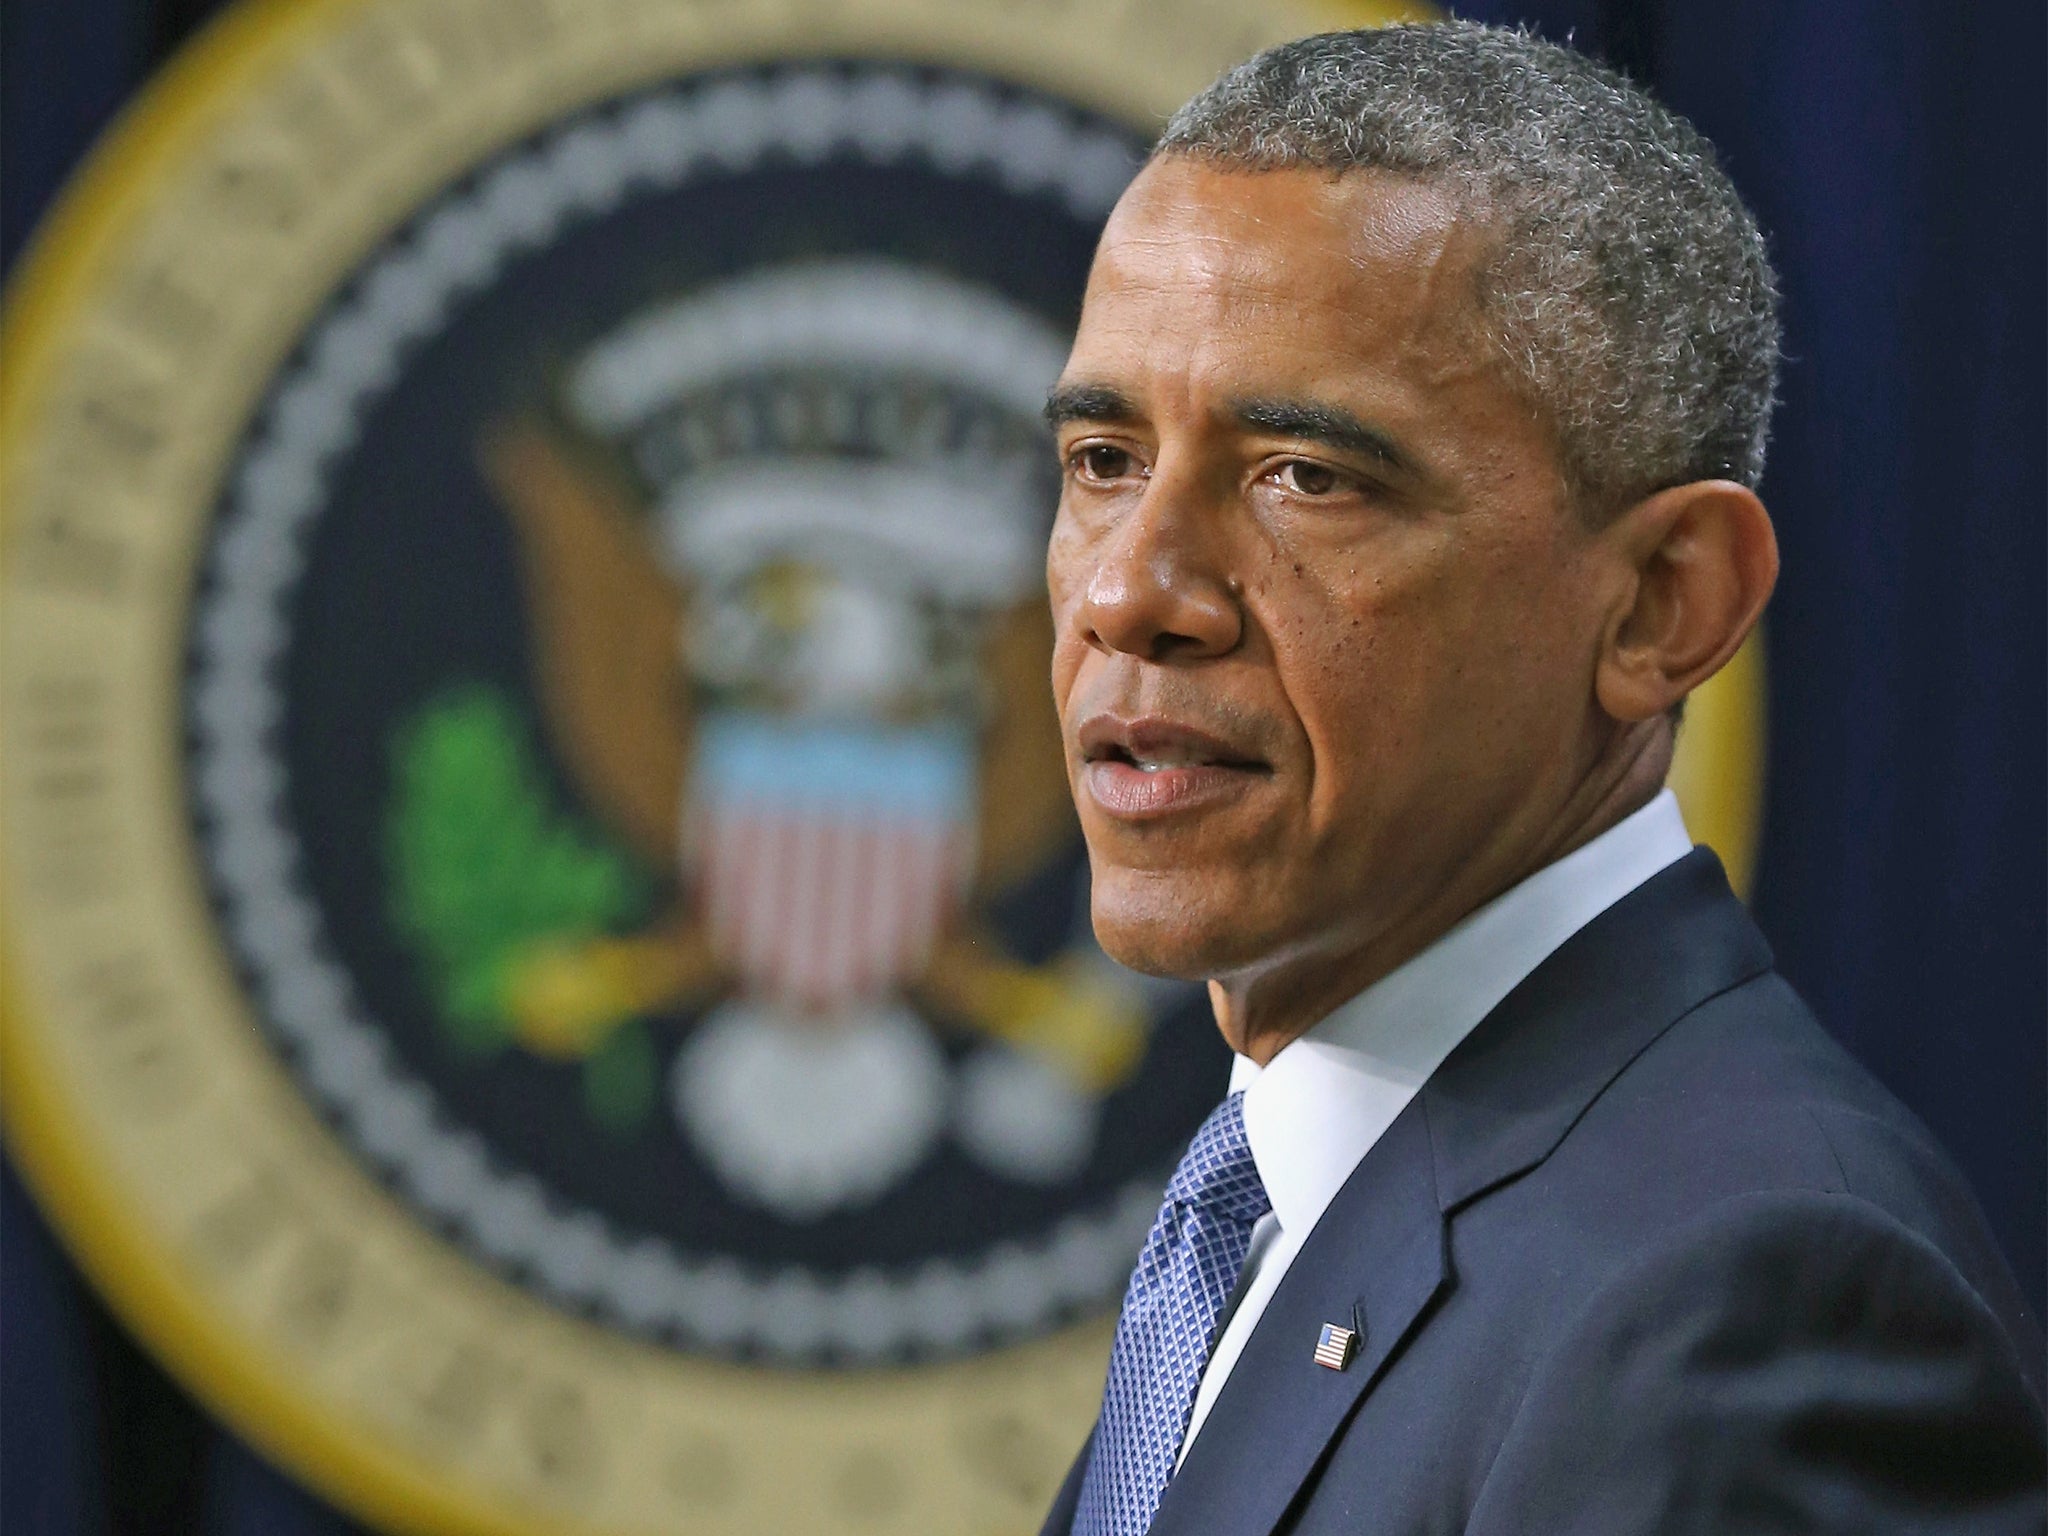 President Obama had already blamed the disaster on 'Russian-backed separatists in Ukraine'